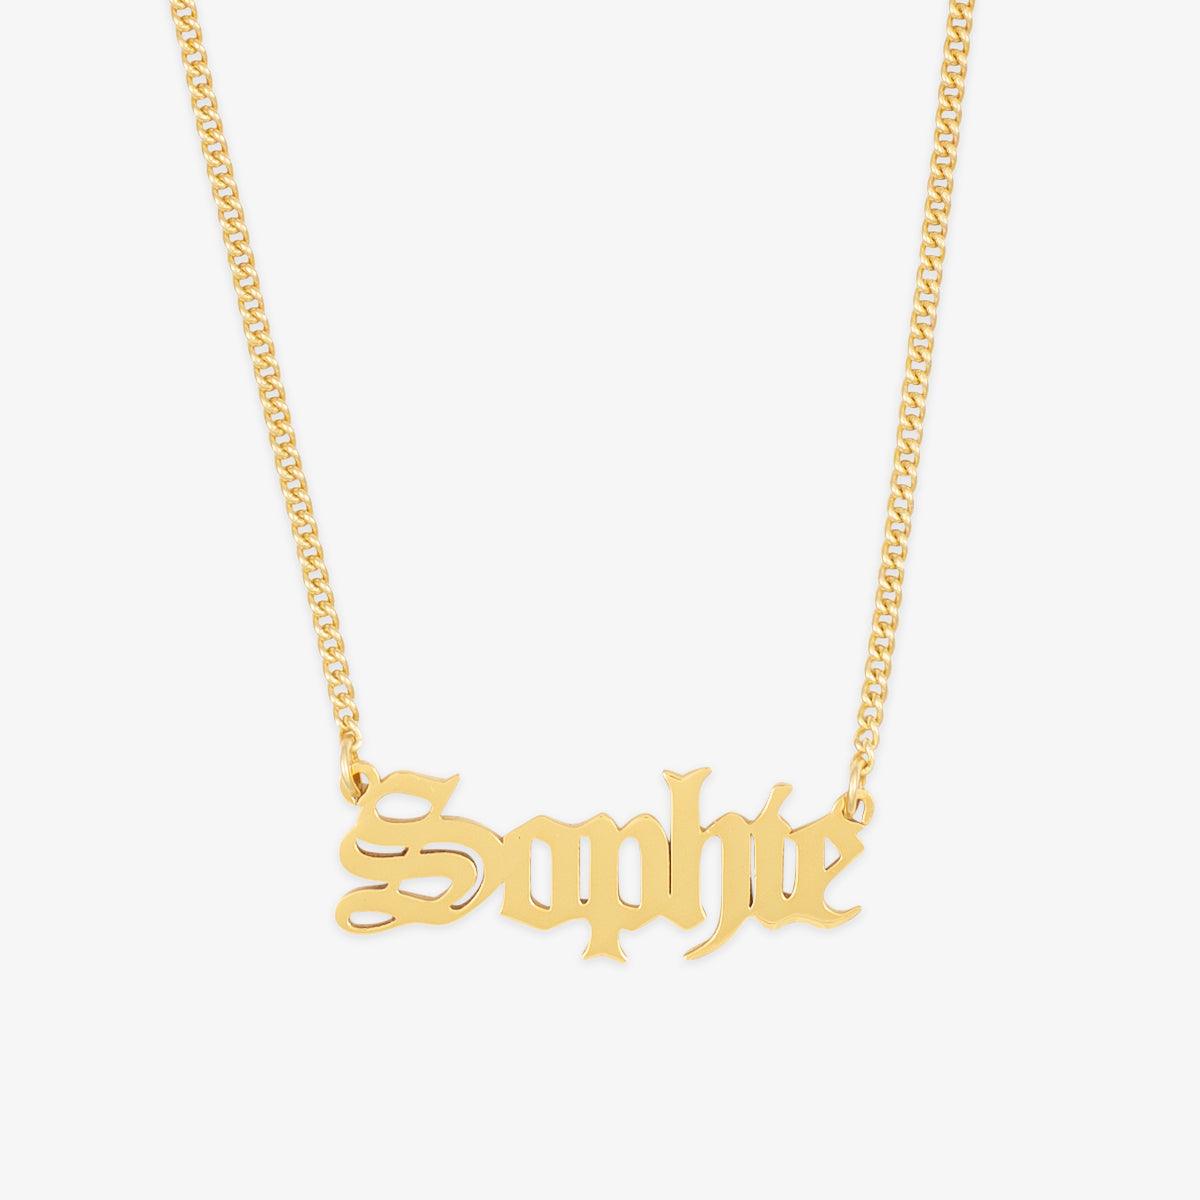 Gothic Elegance Personalized Name Necklace  Herzschmuck